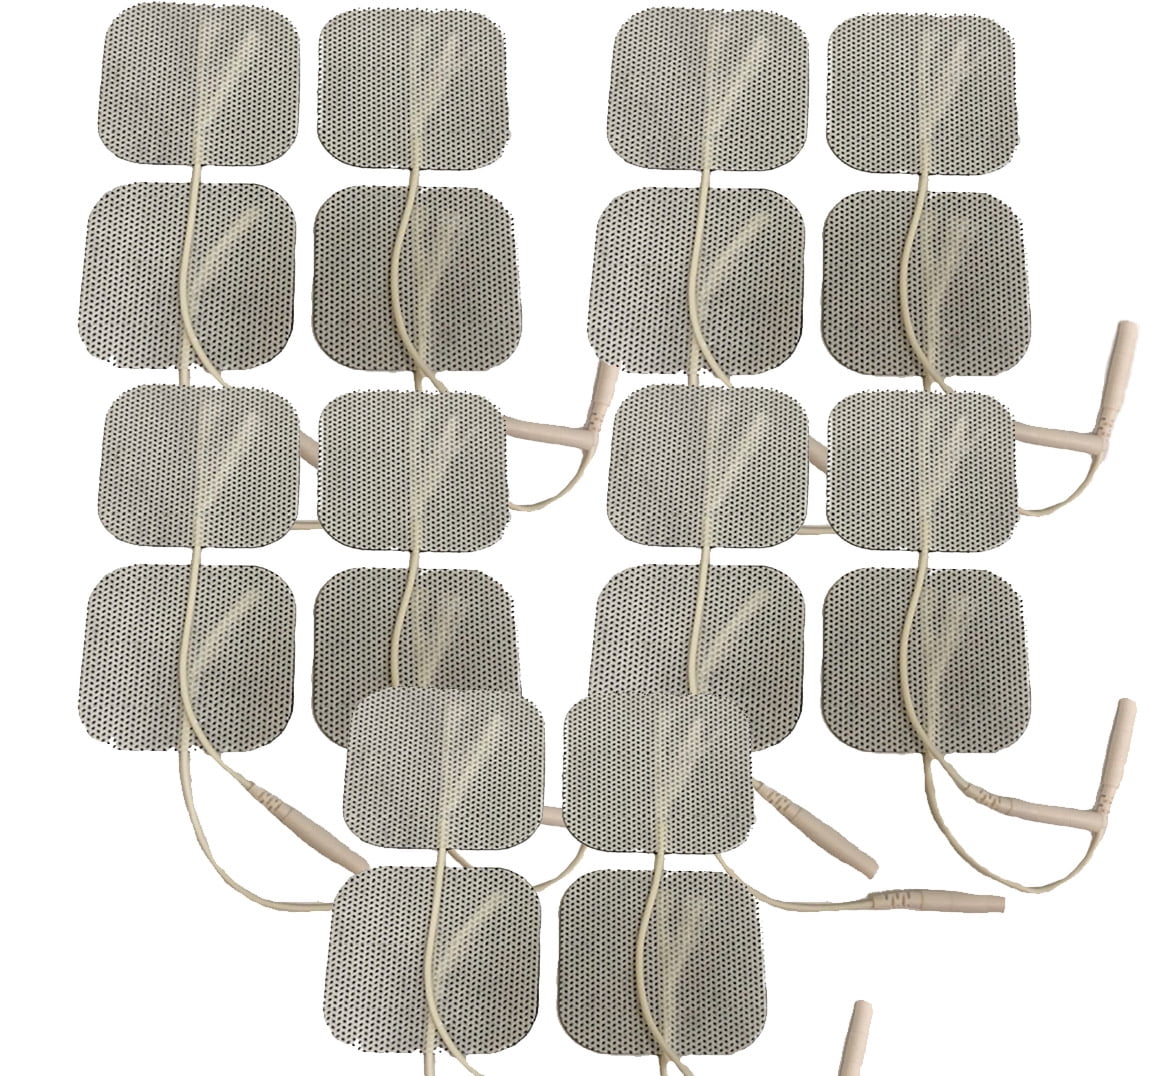 Electrode Pads, 20PCS, 2”x2”, Unit Replacement Pads for